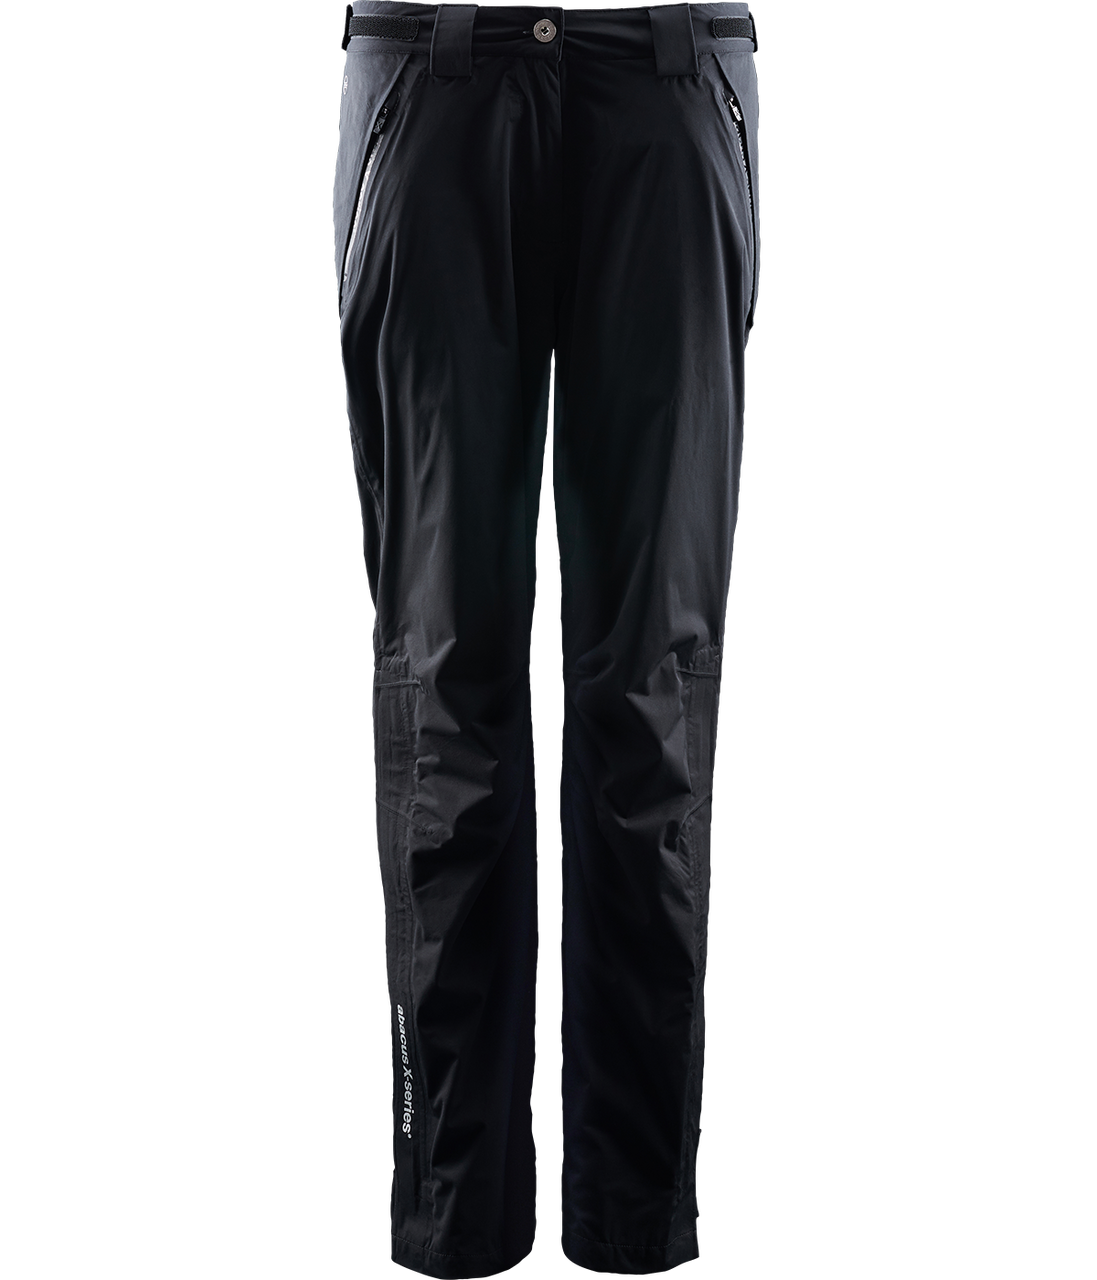 Abacus Sports Wear: Women’s High-Performance Golf Raintrousers- Pitch 37.5